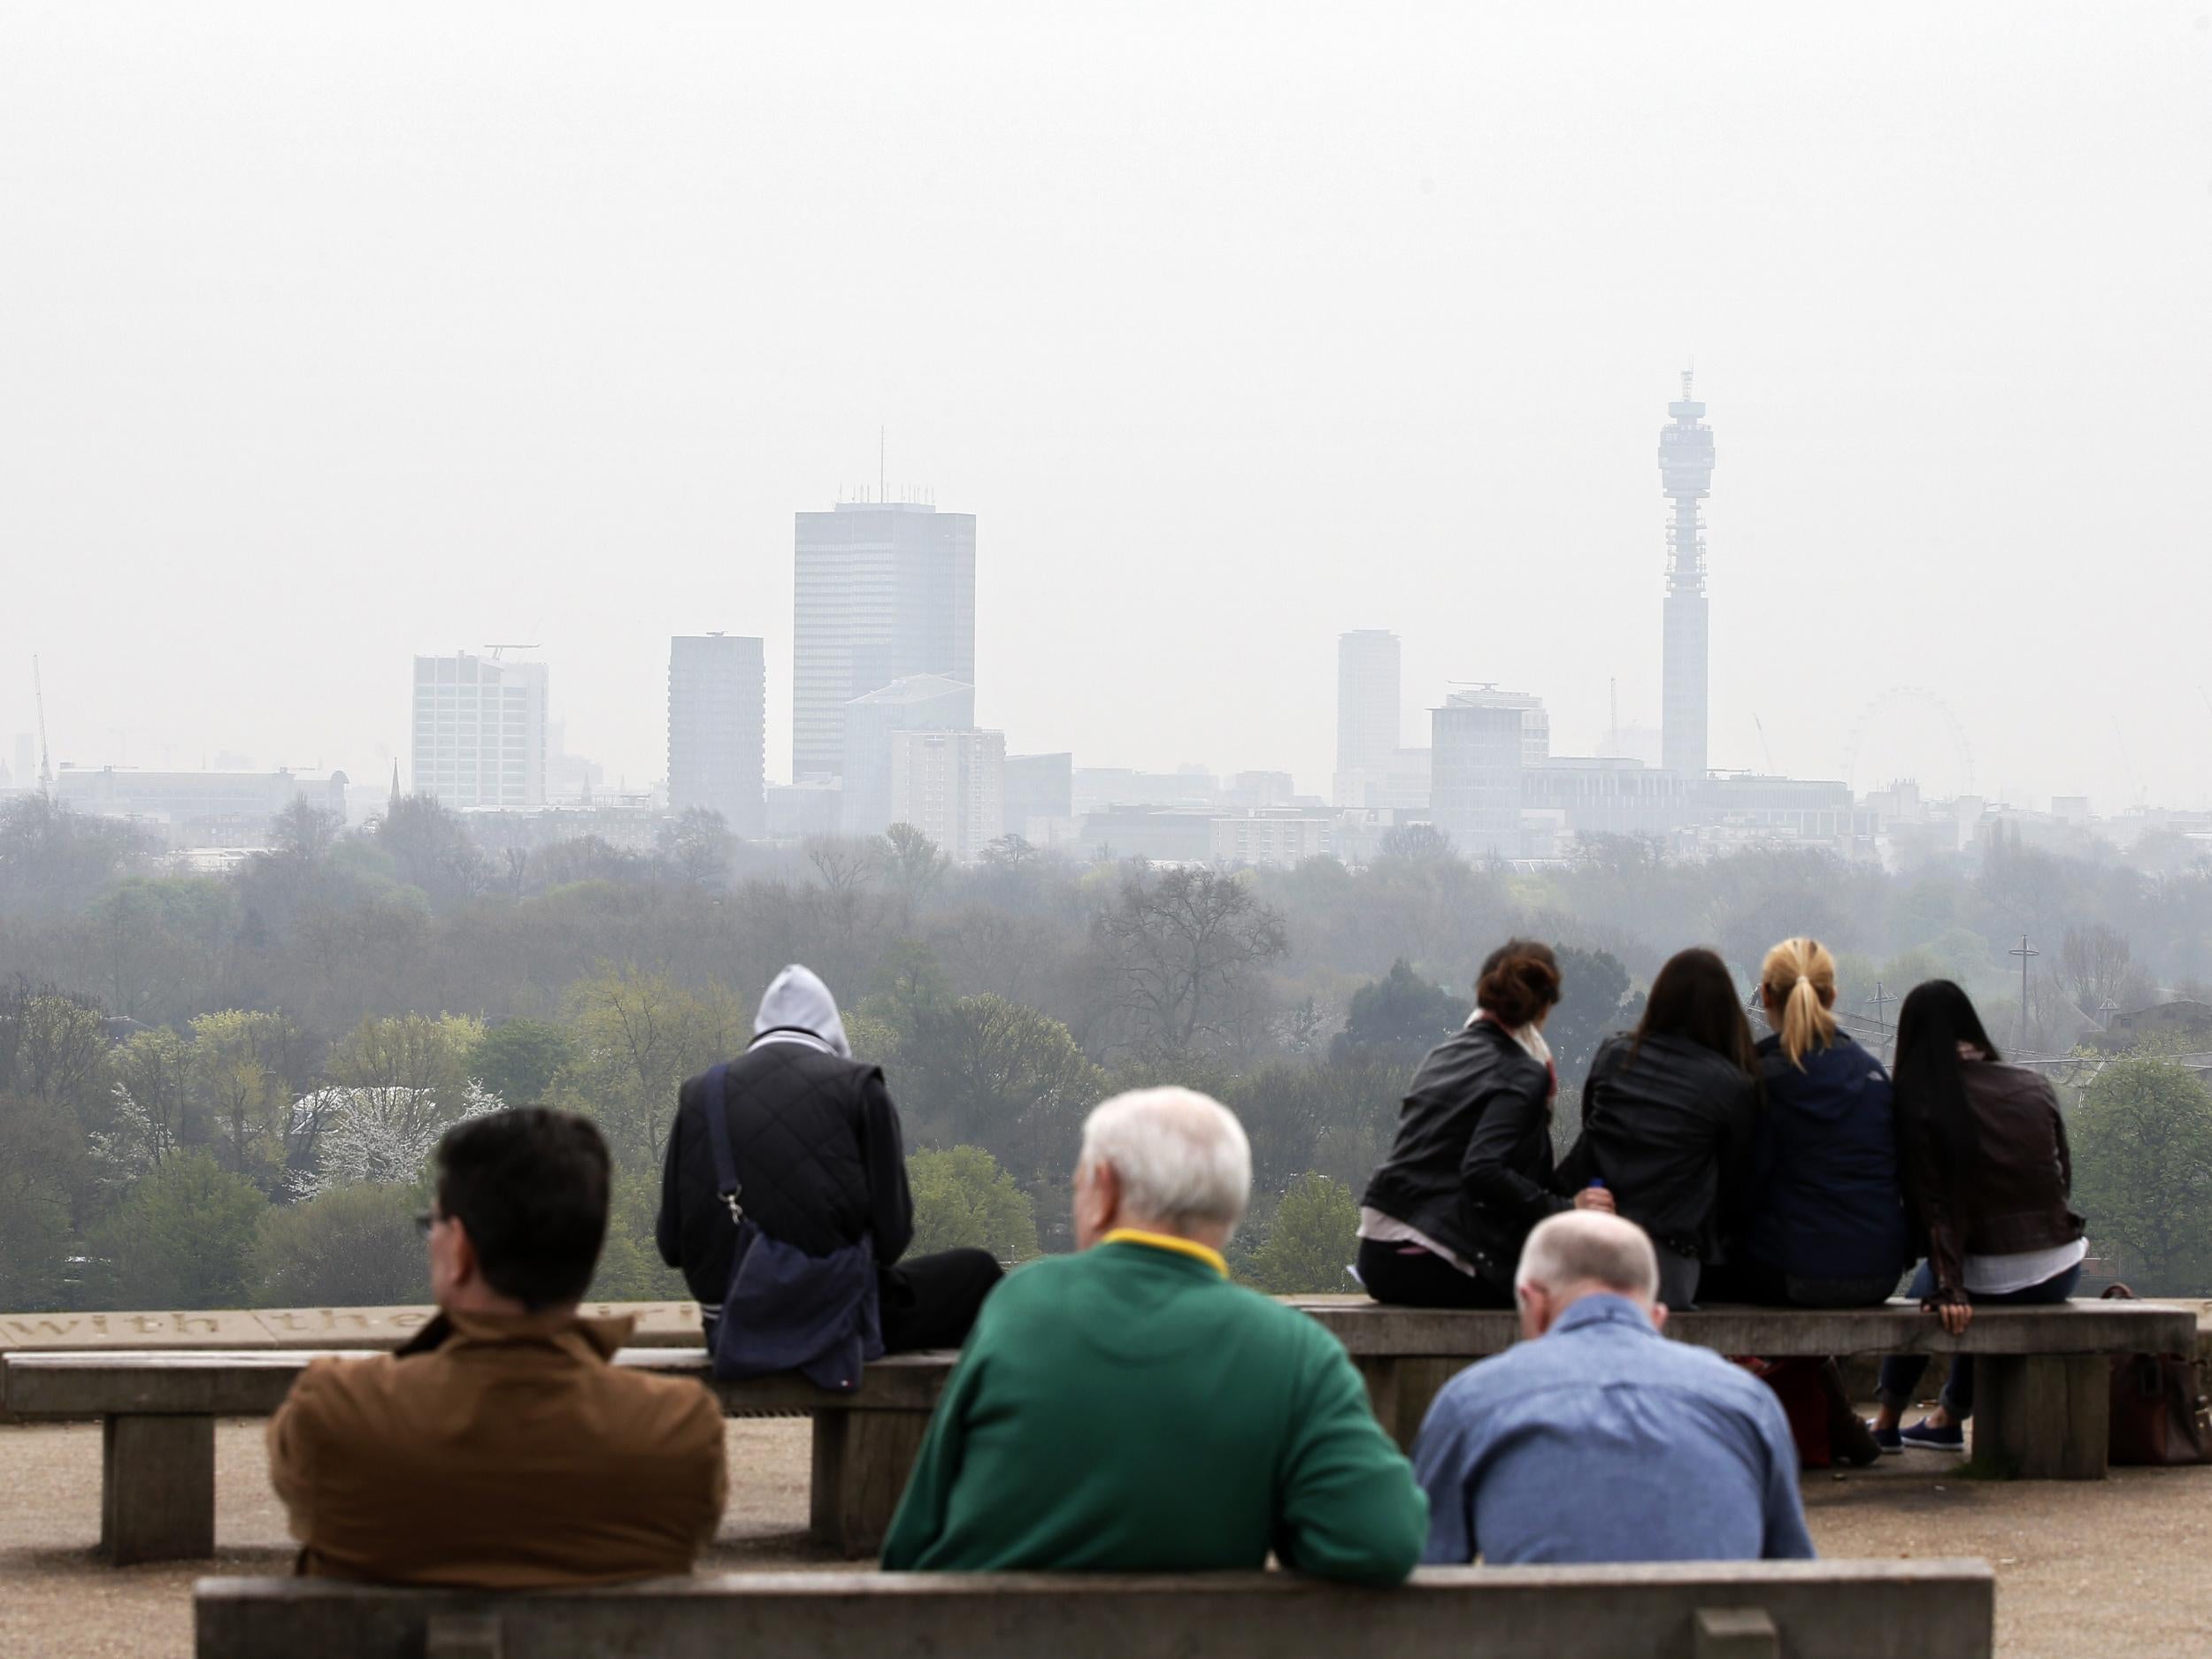 A new study has suggested there is a link between air pollution and crime across the whole of London